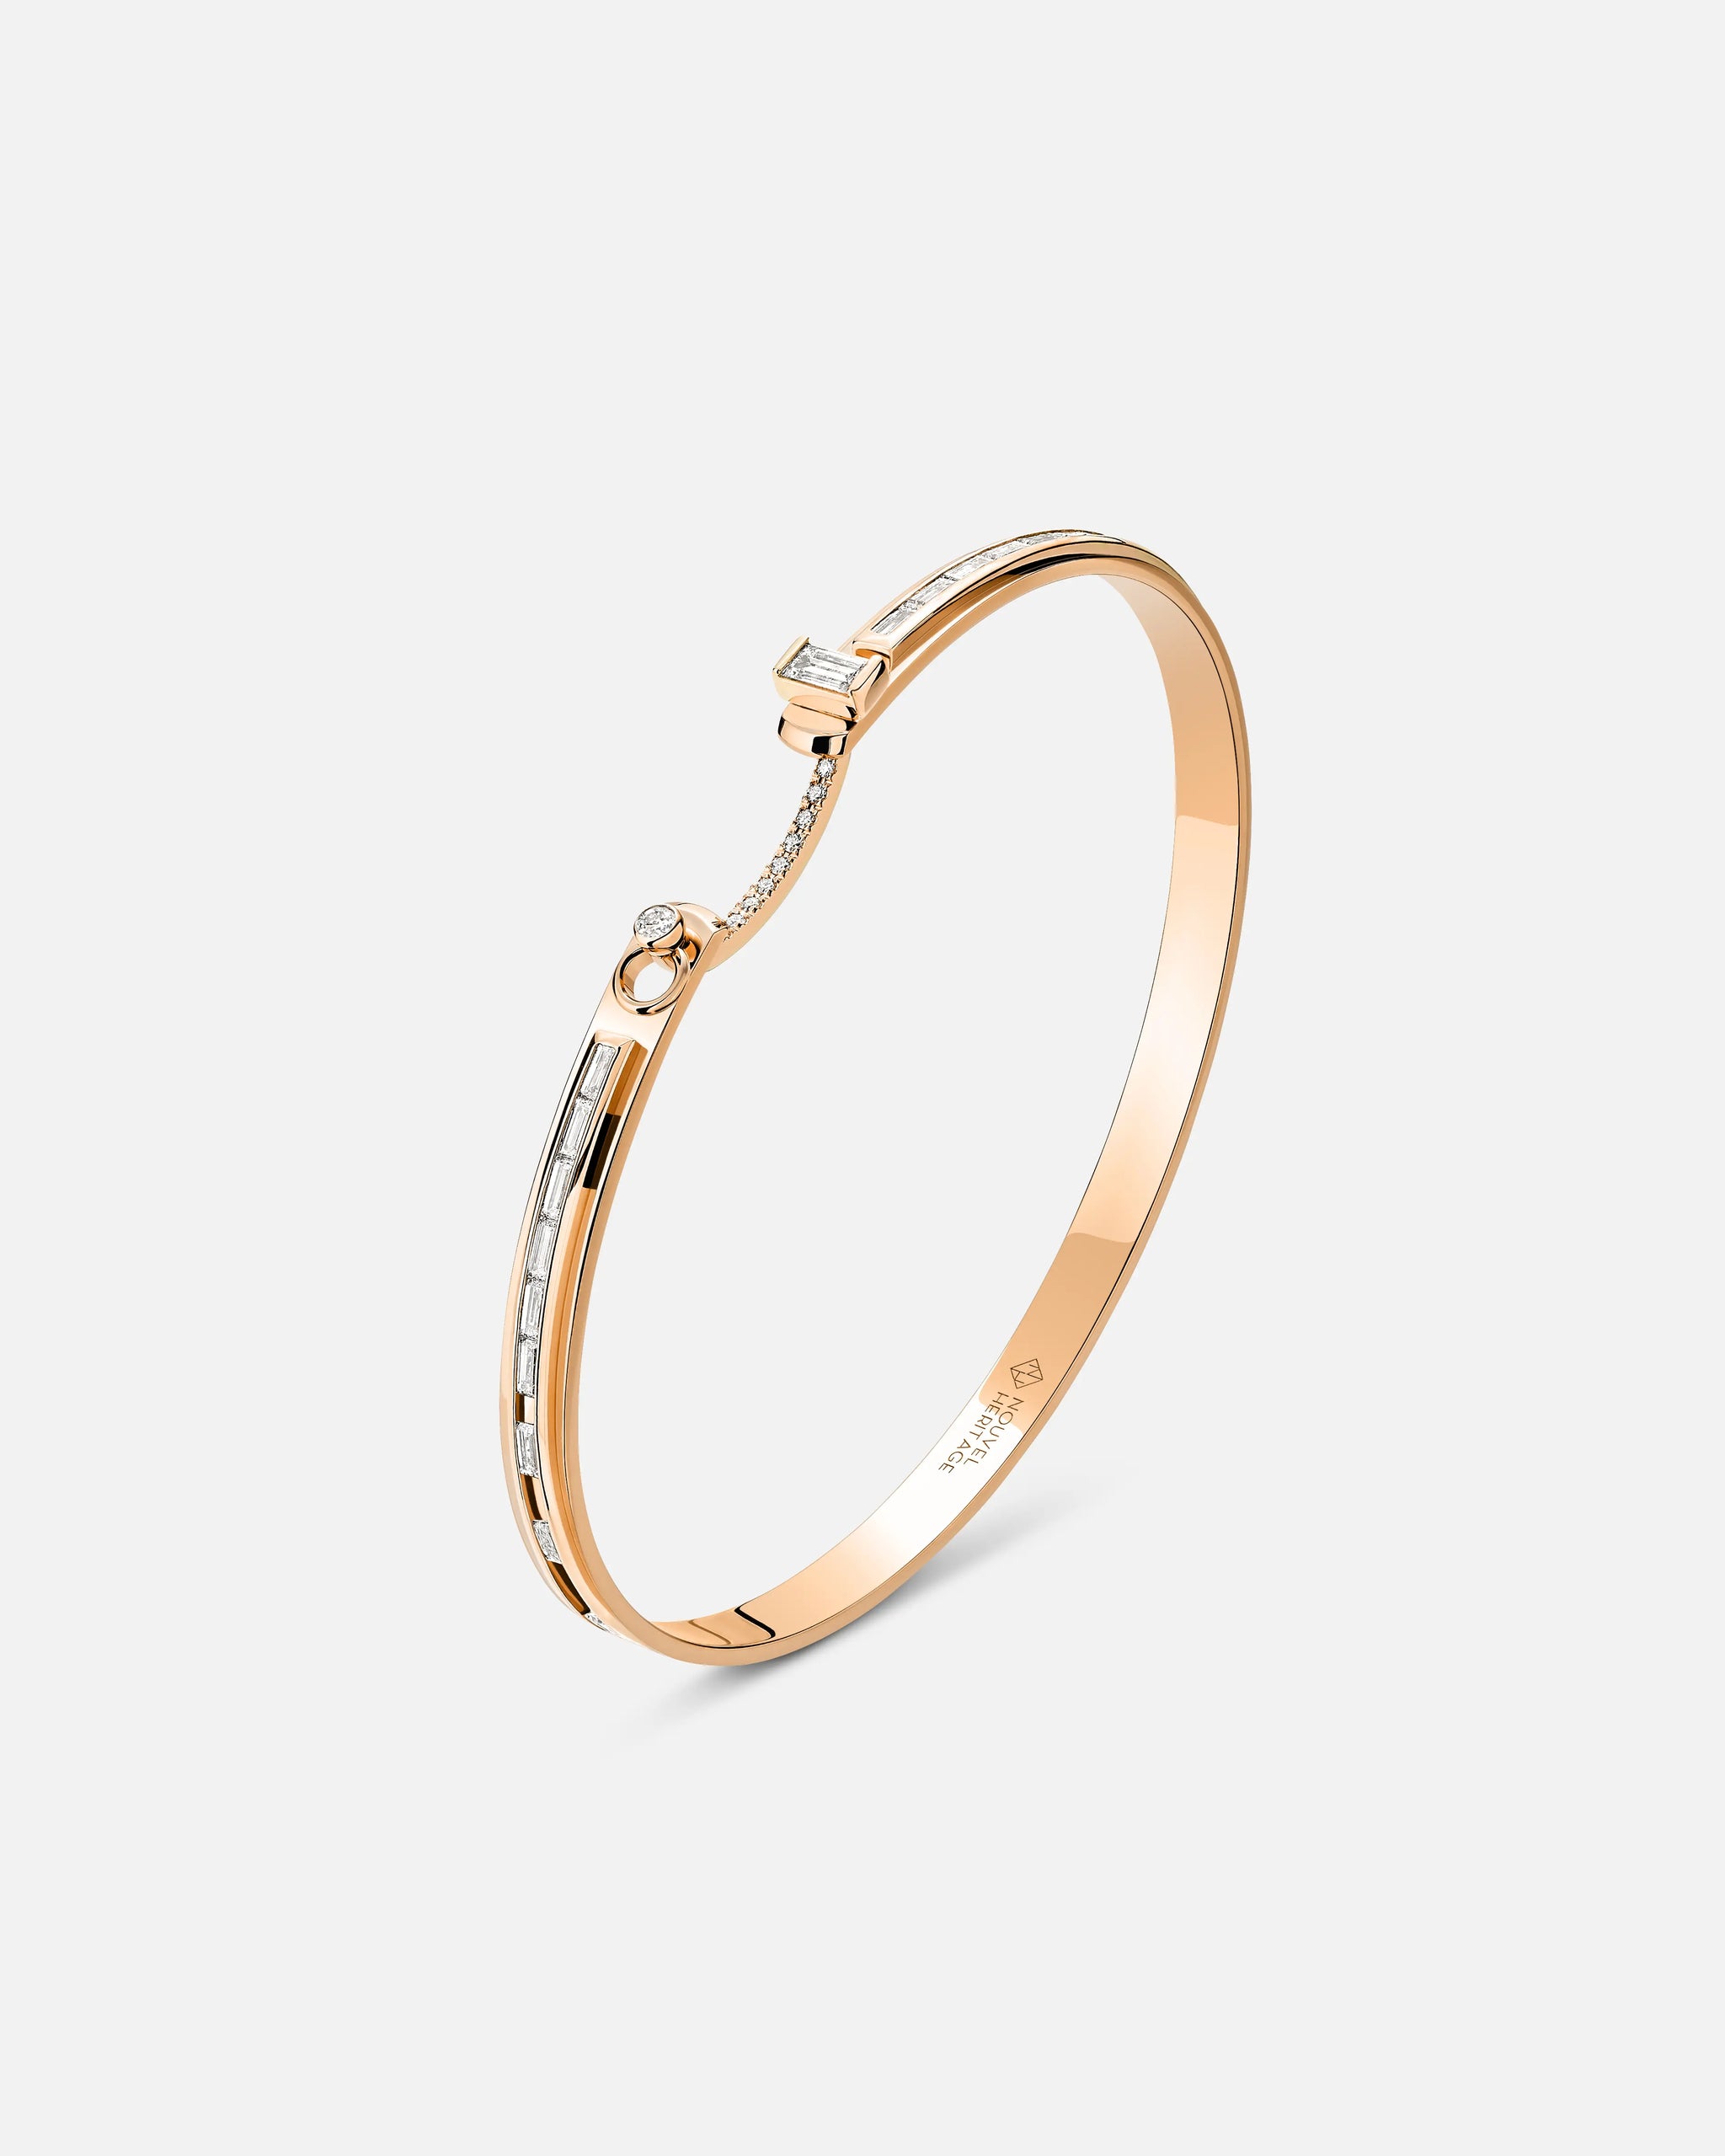 My Best Friend's Wedding Mood Bangle in Rose Gold - 1 - Nouvel Heritage